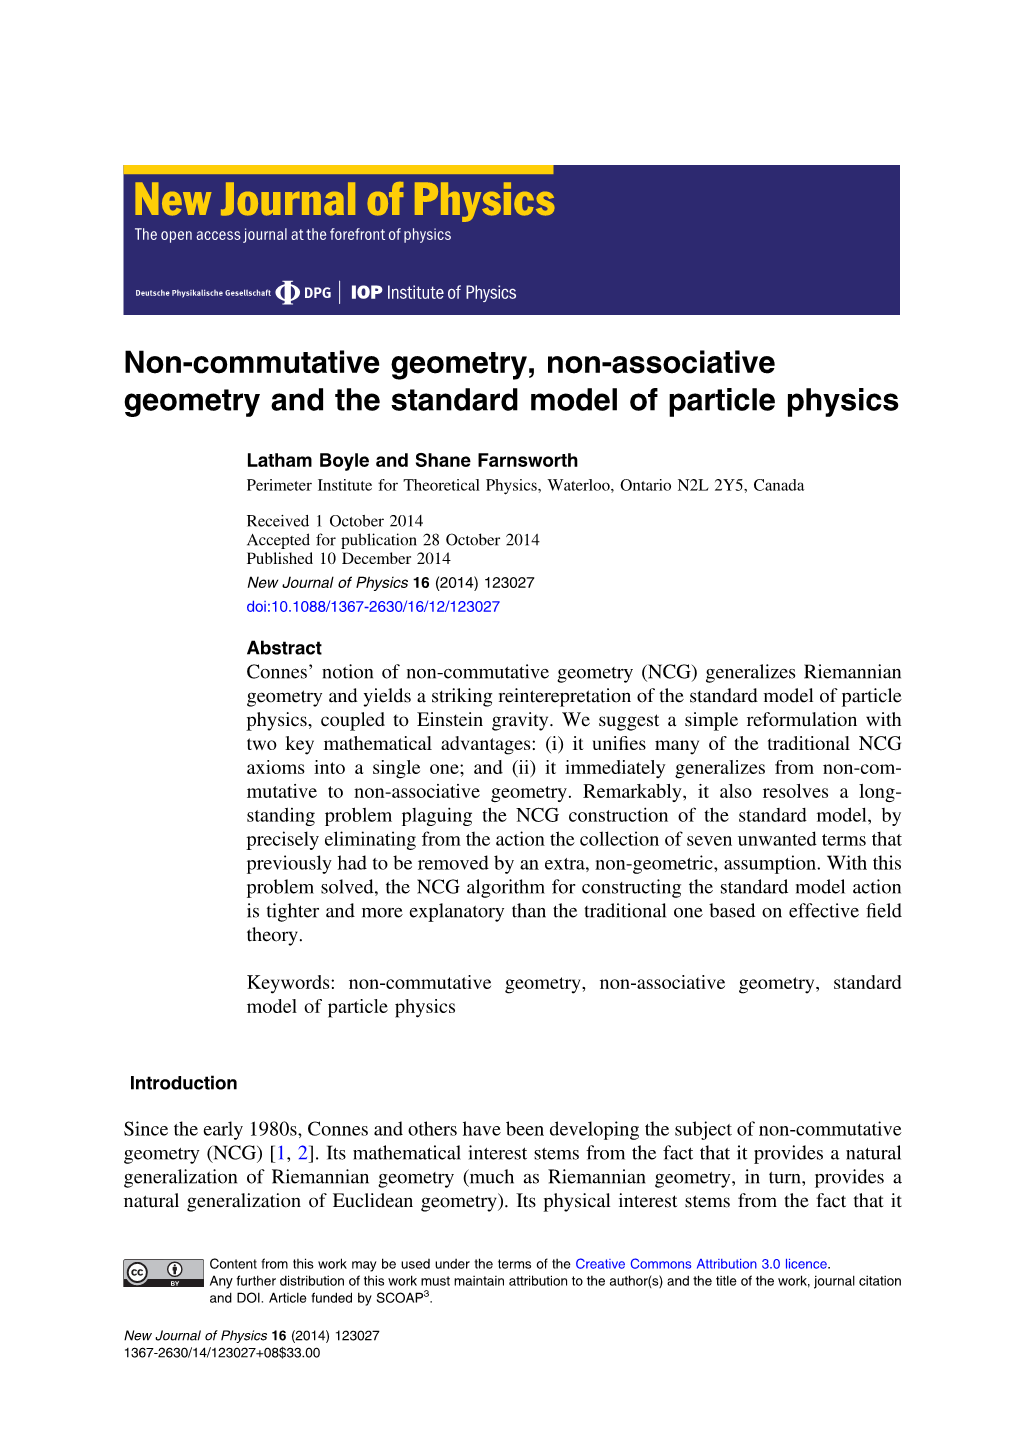 Non-Commutative Geometry, Non-Associative Geometry and the Standard Model of Particle Physics